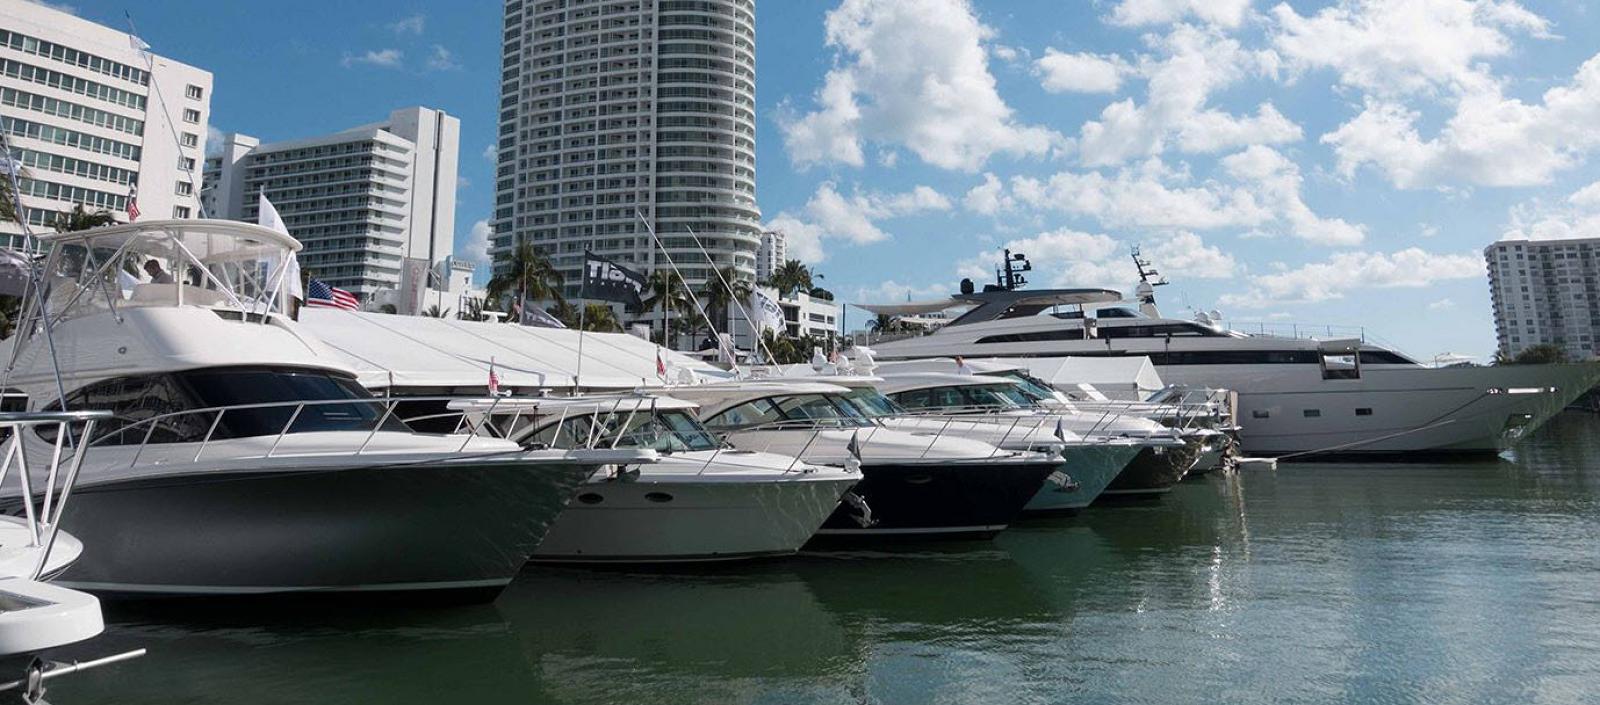 The Atlantic City Boat Show United Yacht Sales